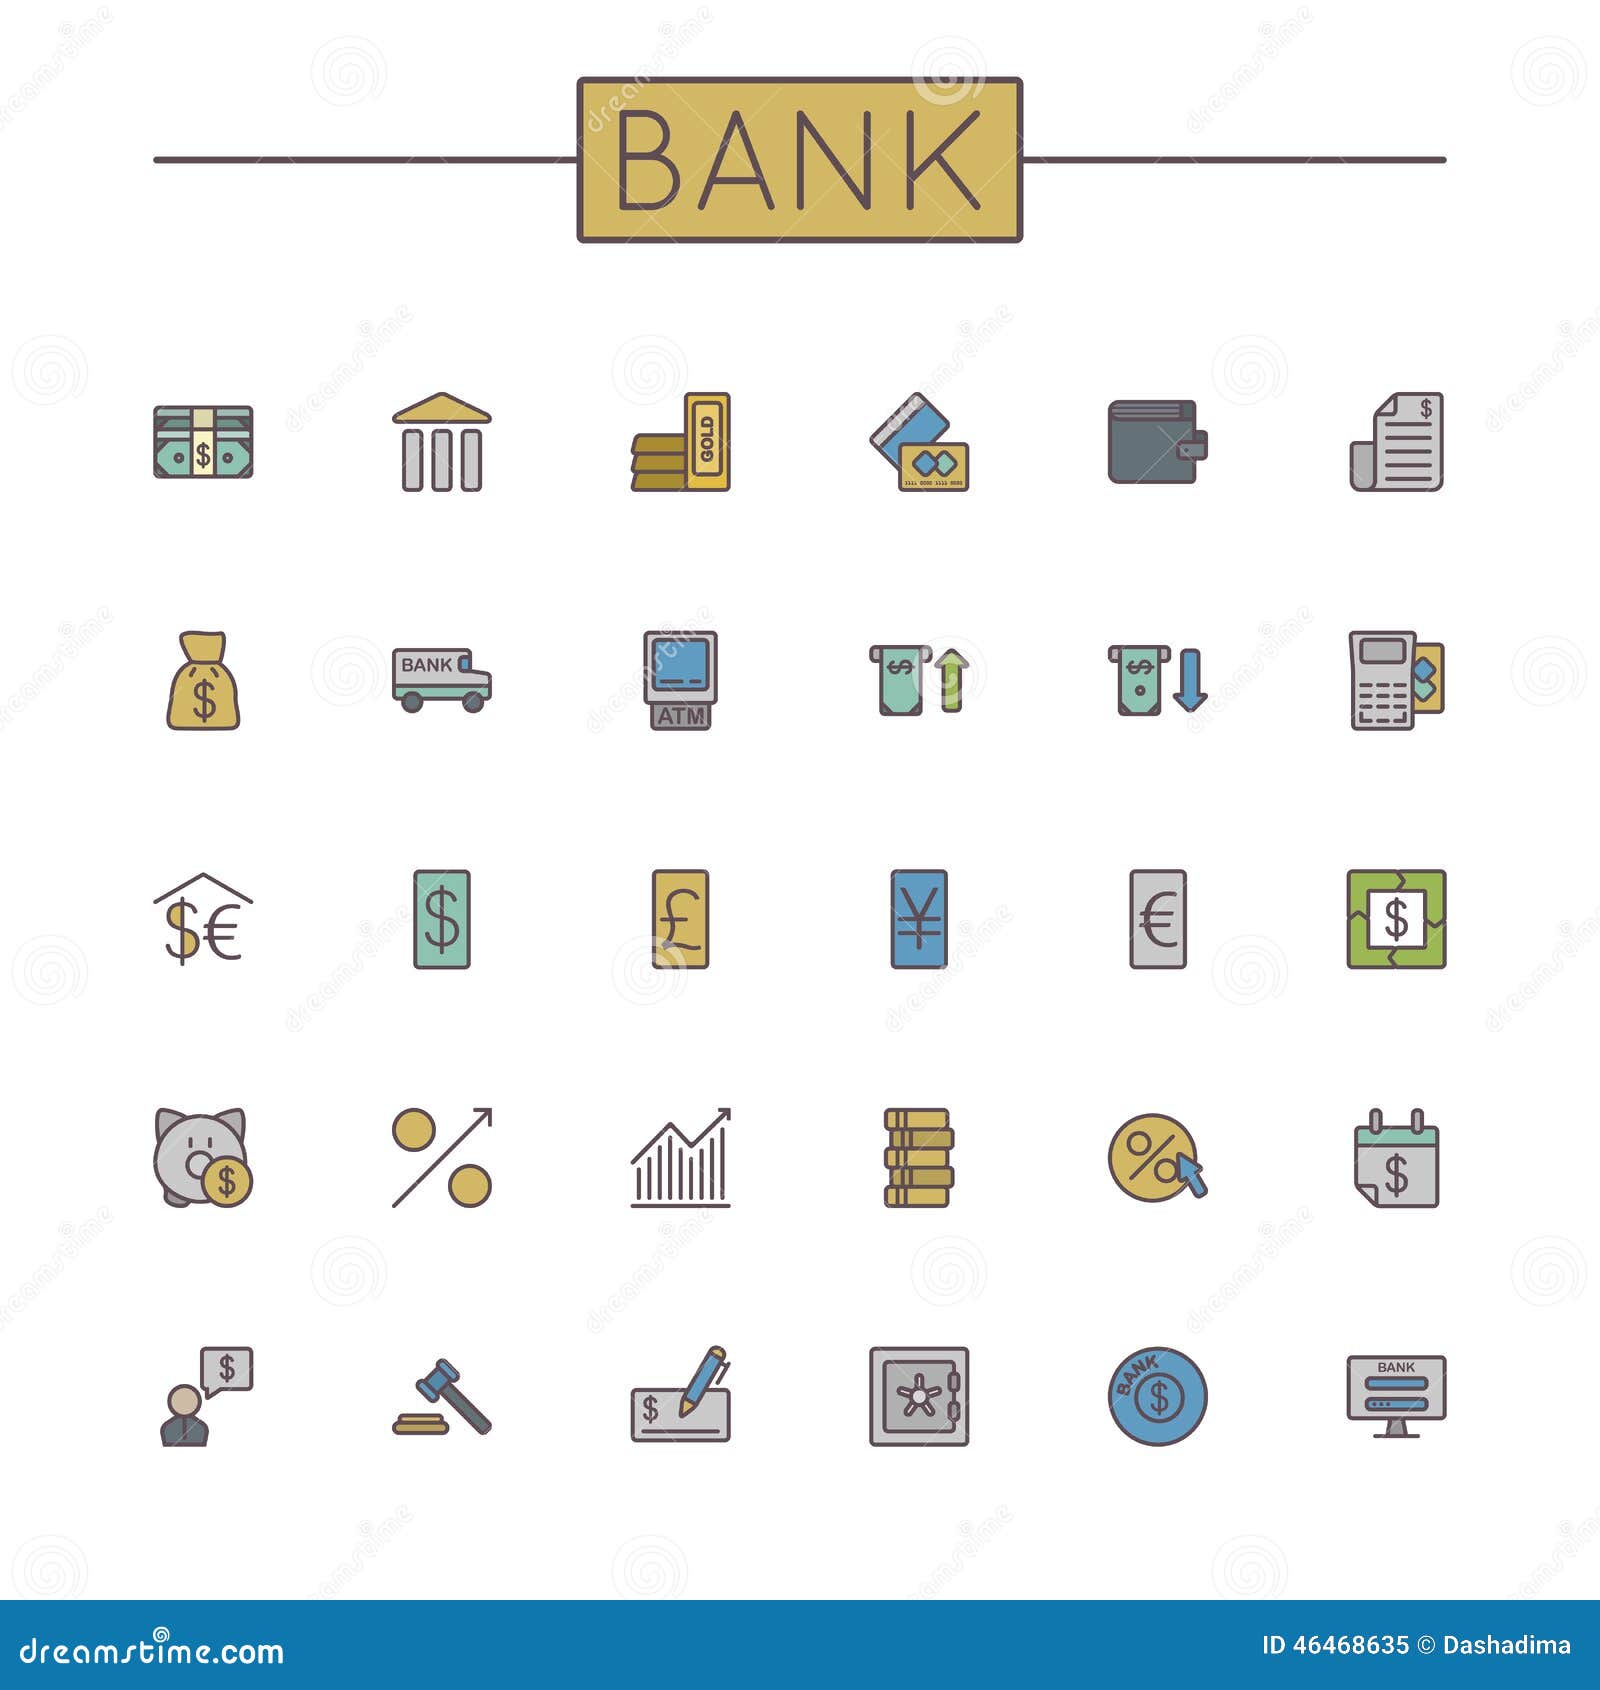 https://thumbs.dreamstime.com/z/vector-colored-bank-line-icons-white-background-46468635.jpg